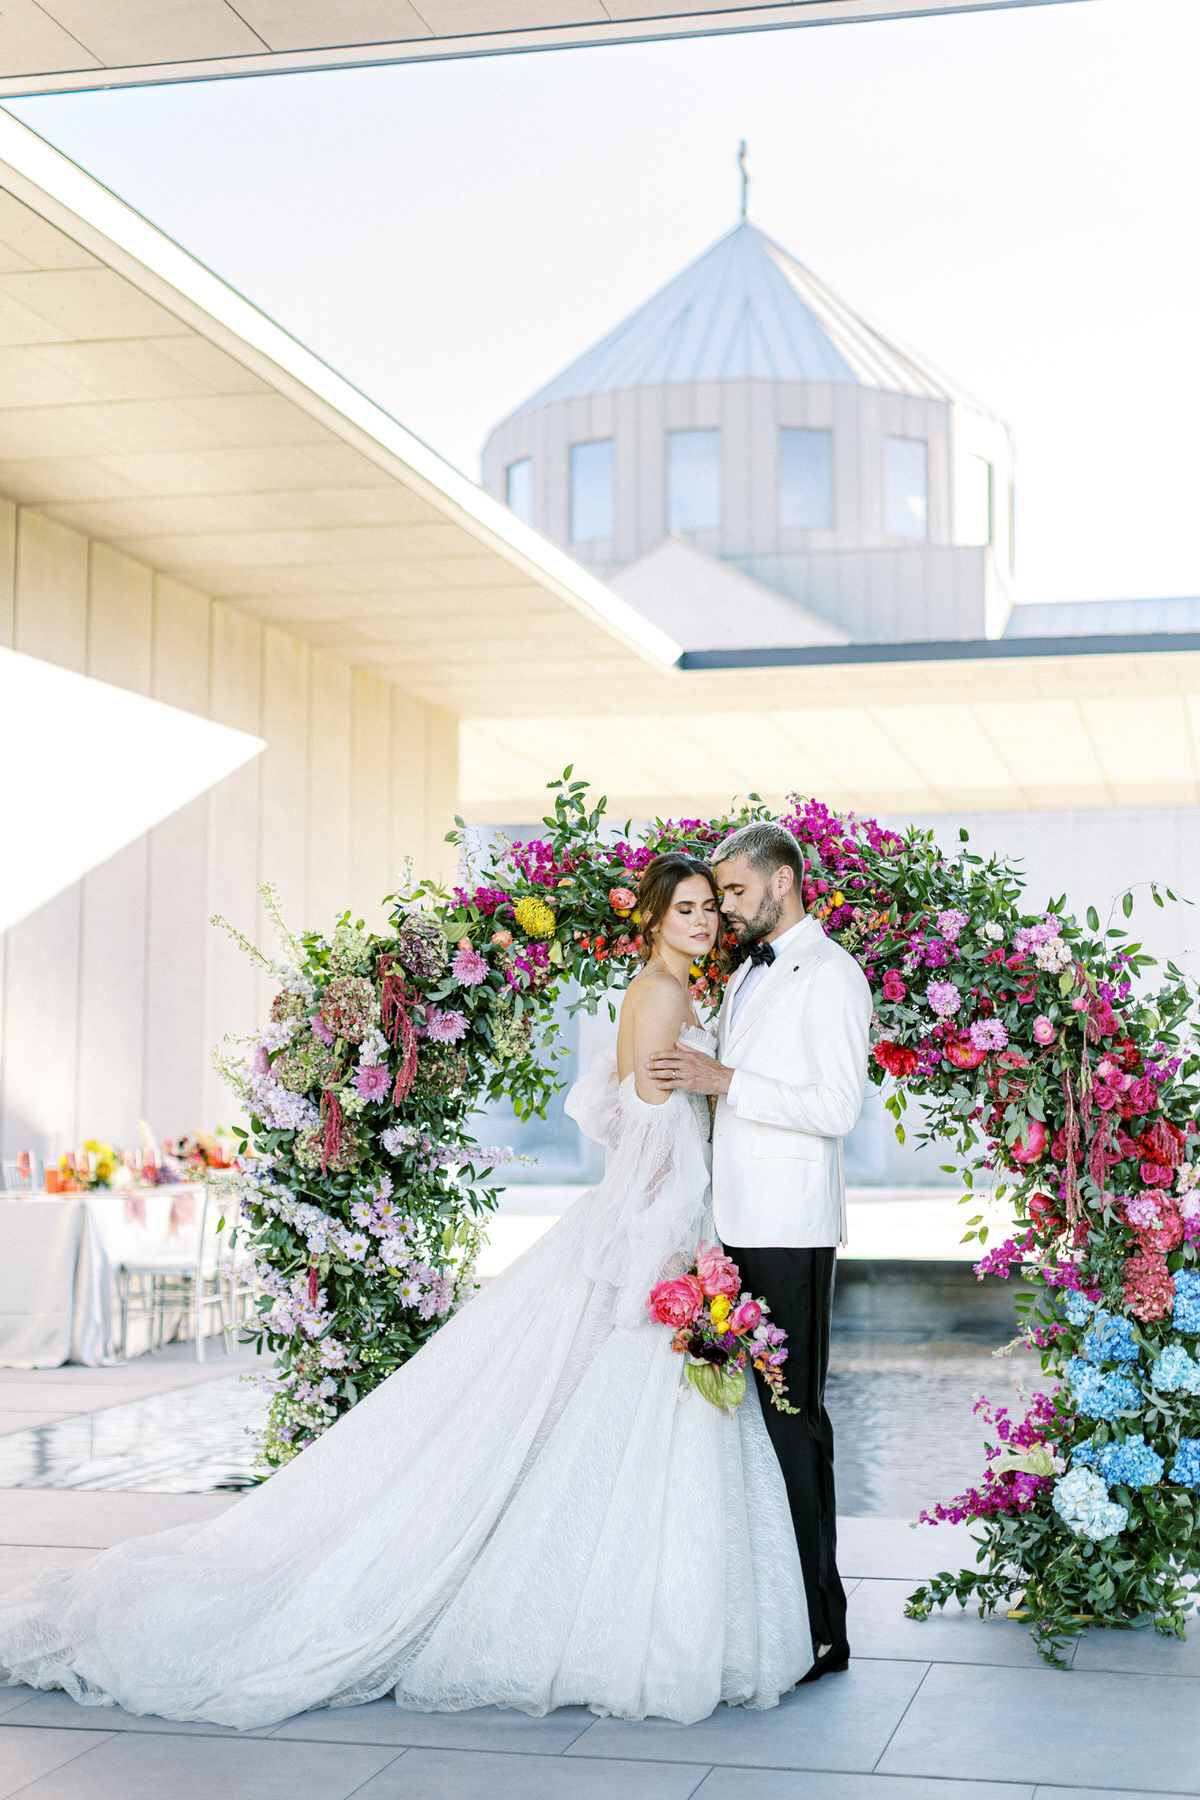 This Couple Personalized Their Lopez Island Wedding with Tons of DIY Details